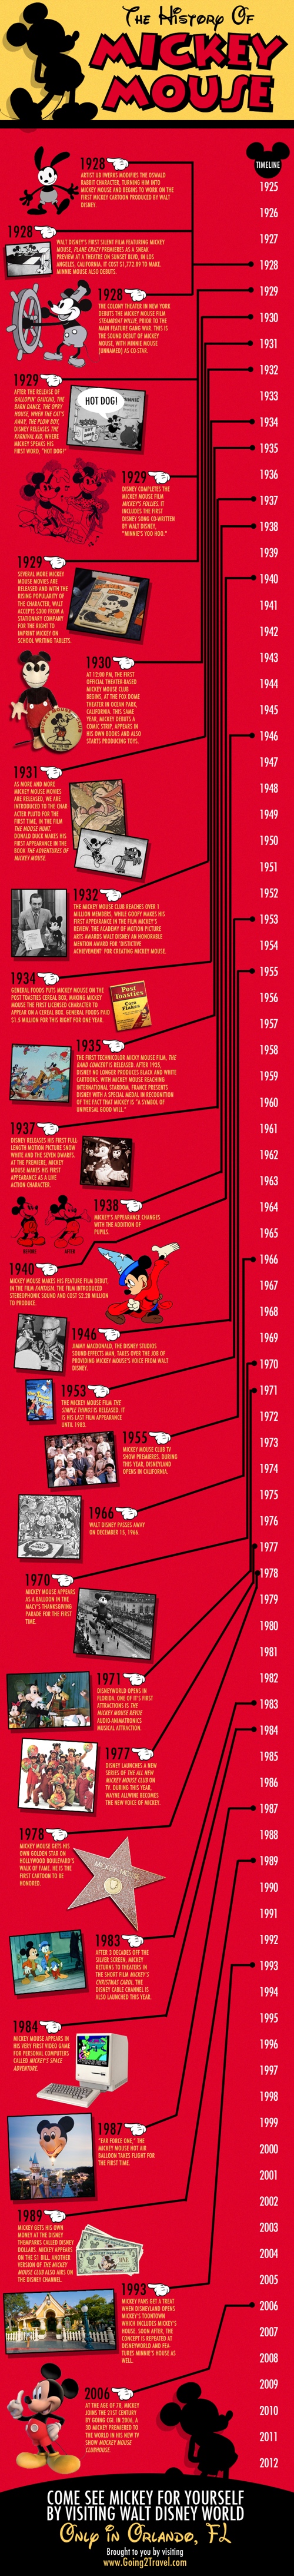 The History of Mickey Mouse infographic